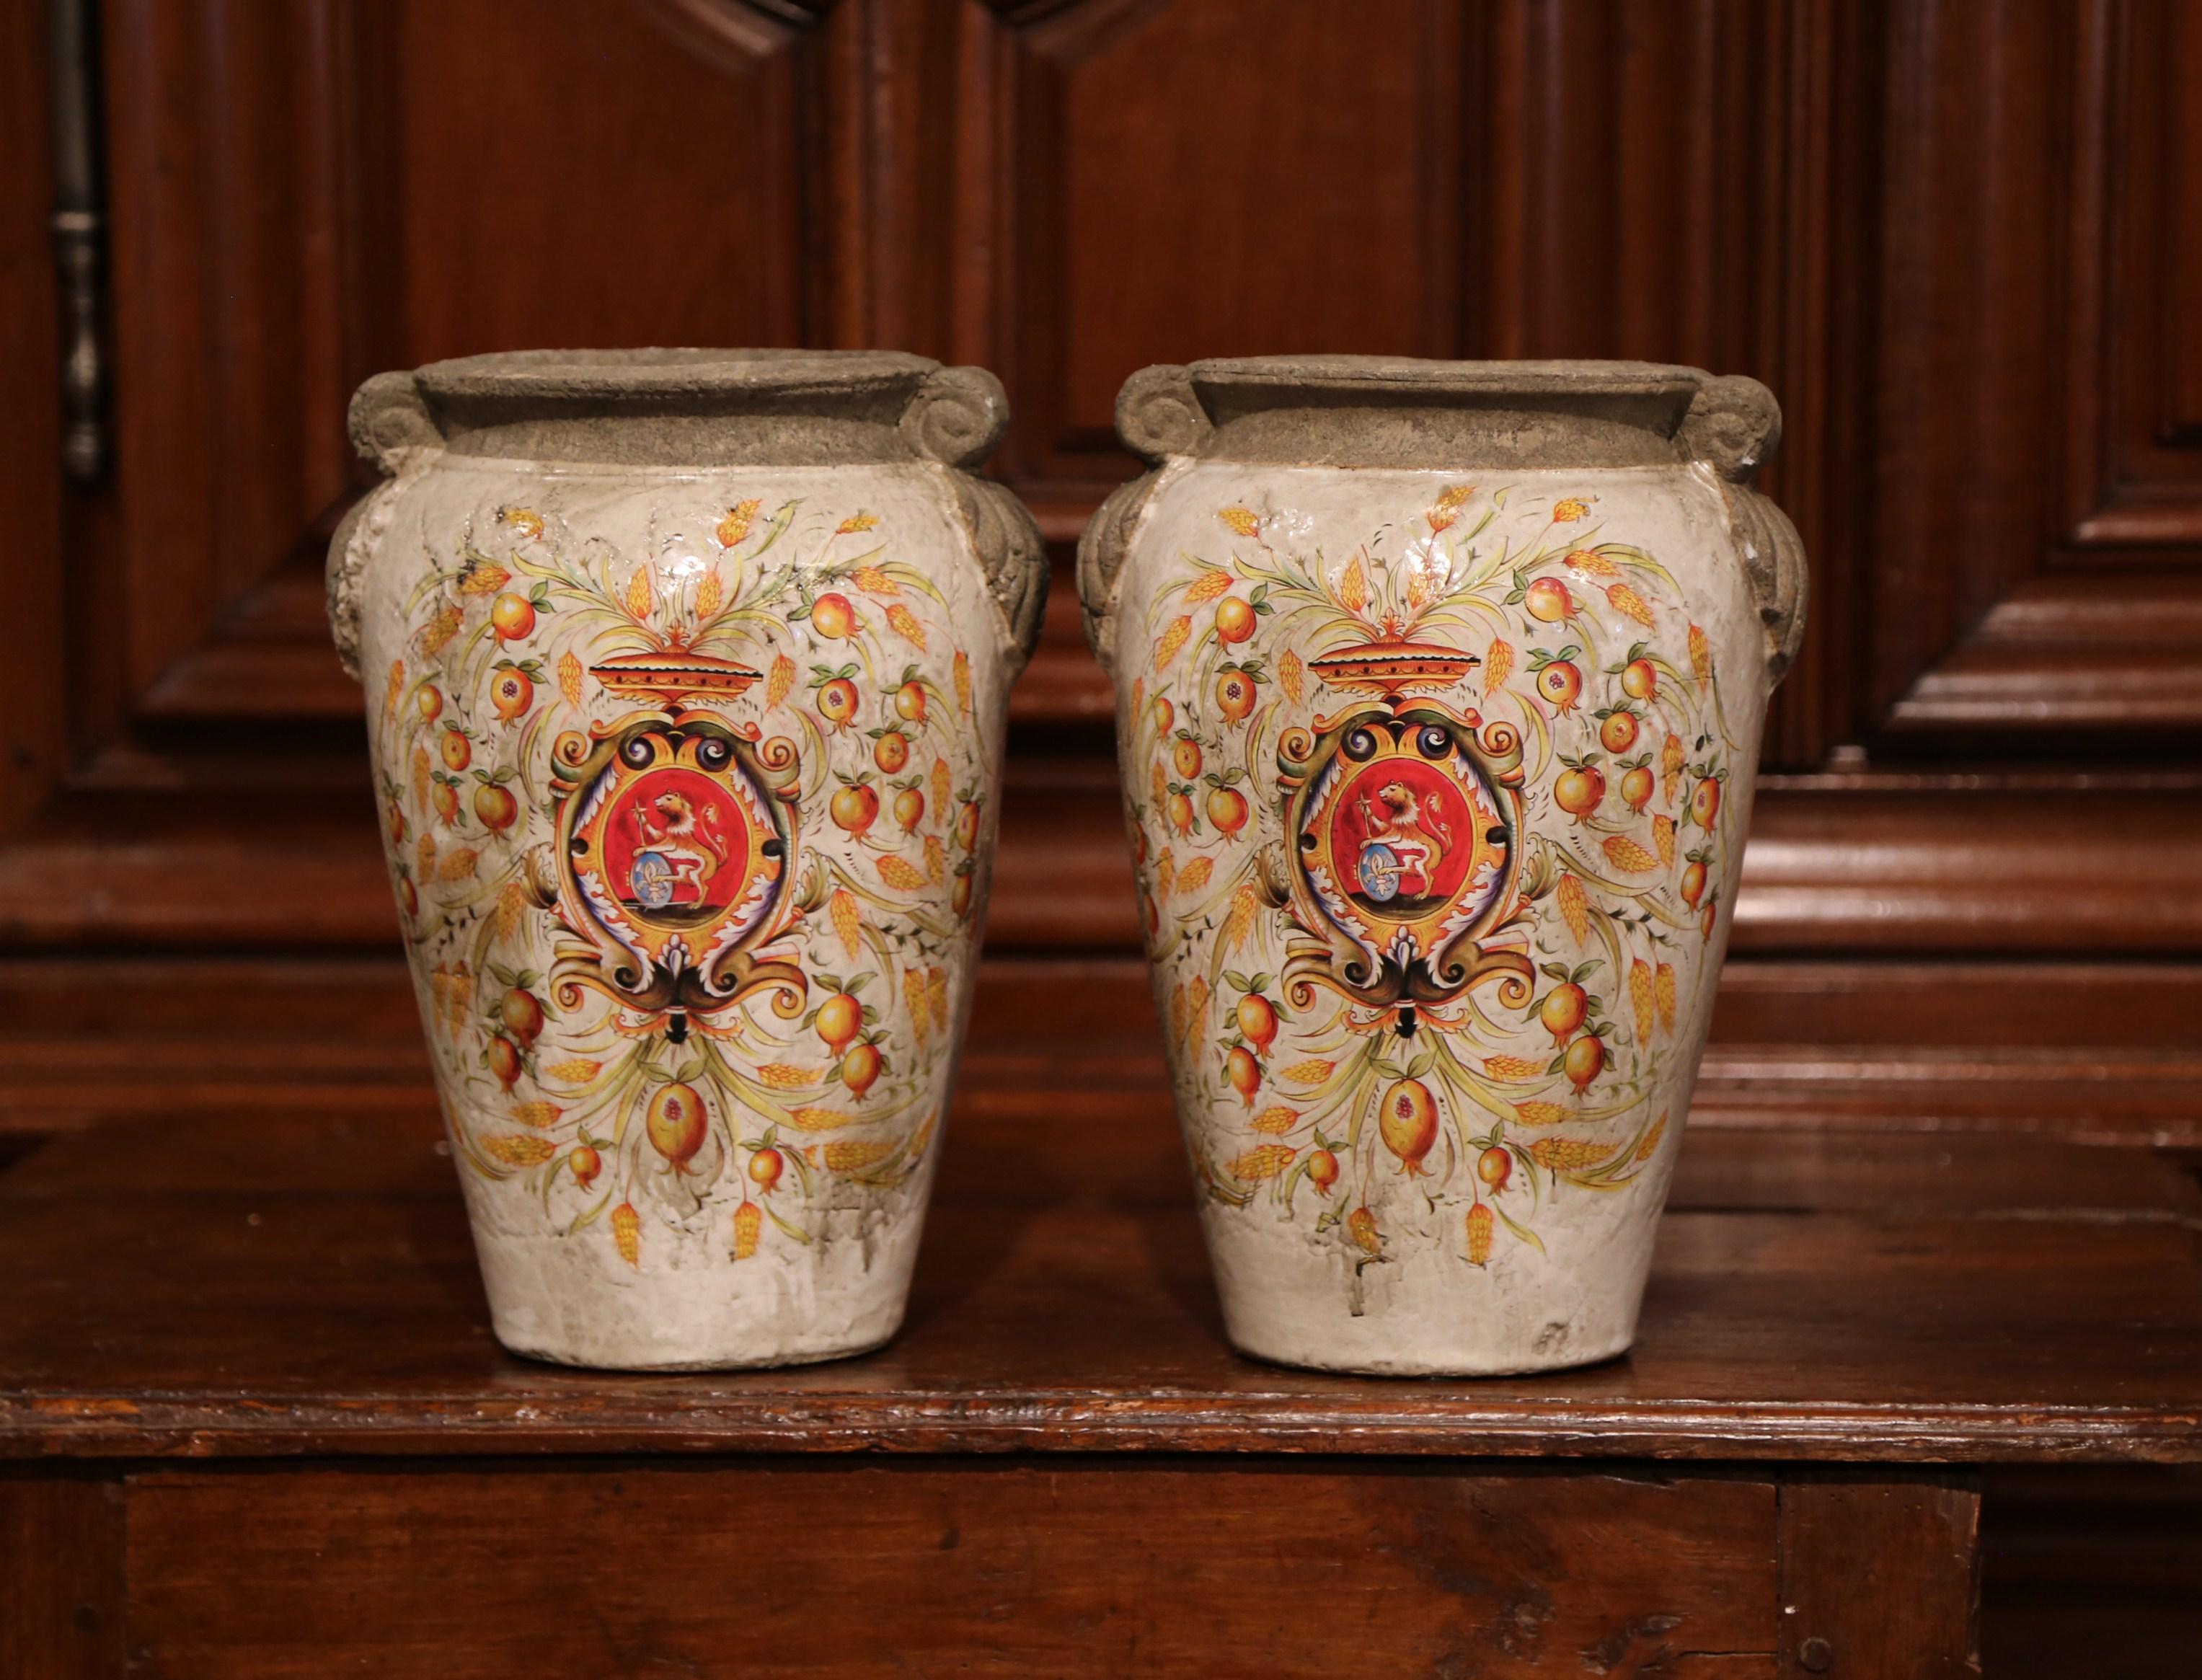 Contemporary Pair of Italian Hand Painted Ceramic Vases with Wheat and Fruit Decor